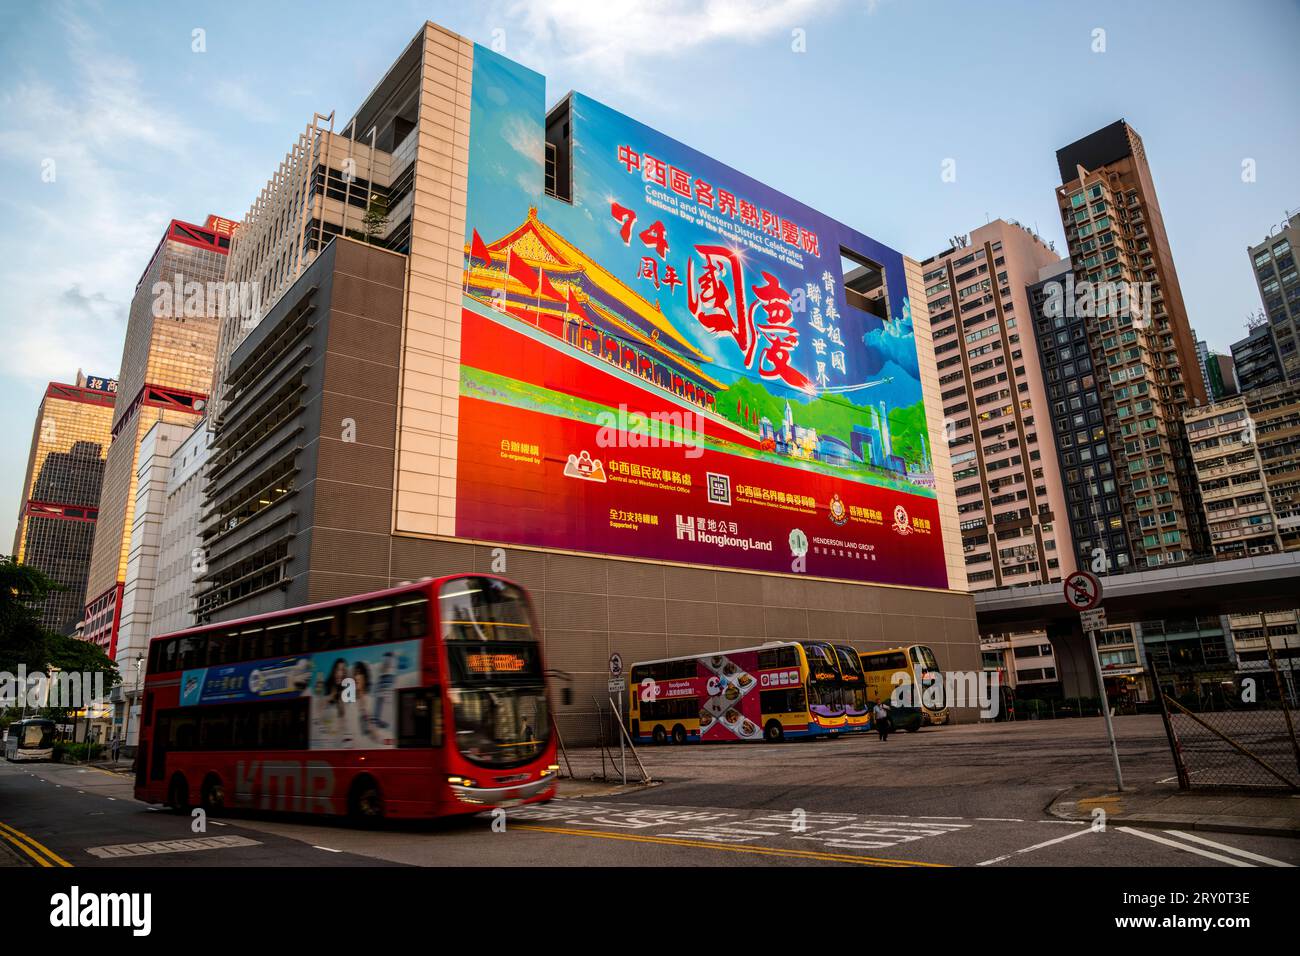 A banner covering the side of a large building in the city center celebrating the 74th anniversary of China's National Day, Hong Kong, China. Stock Photo